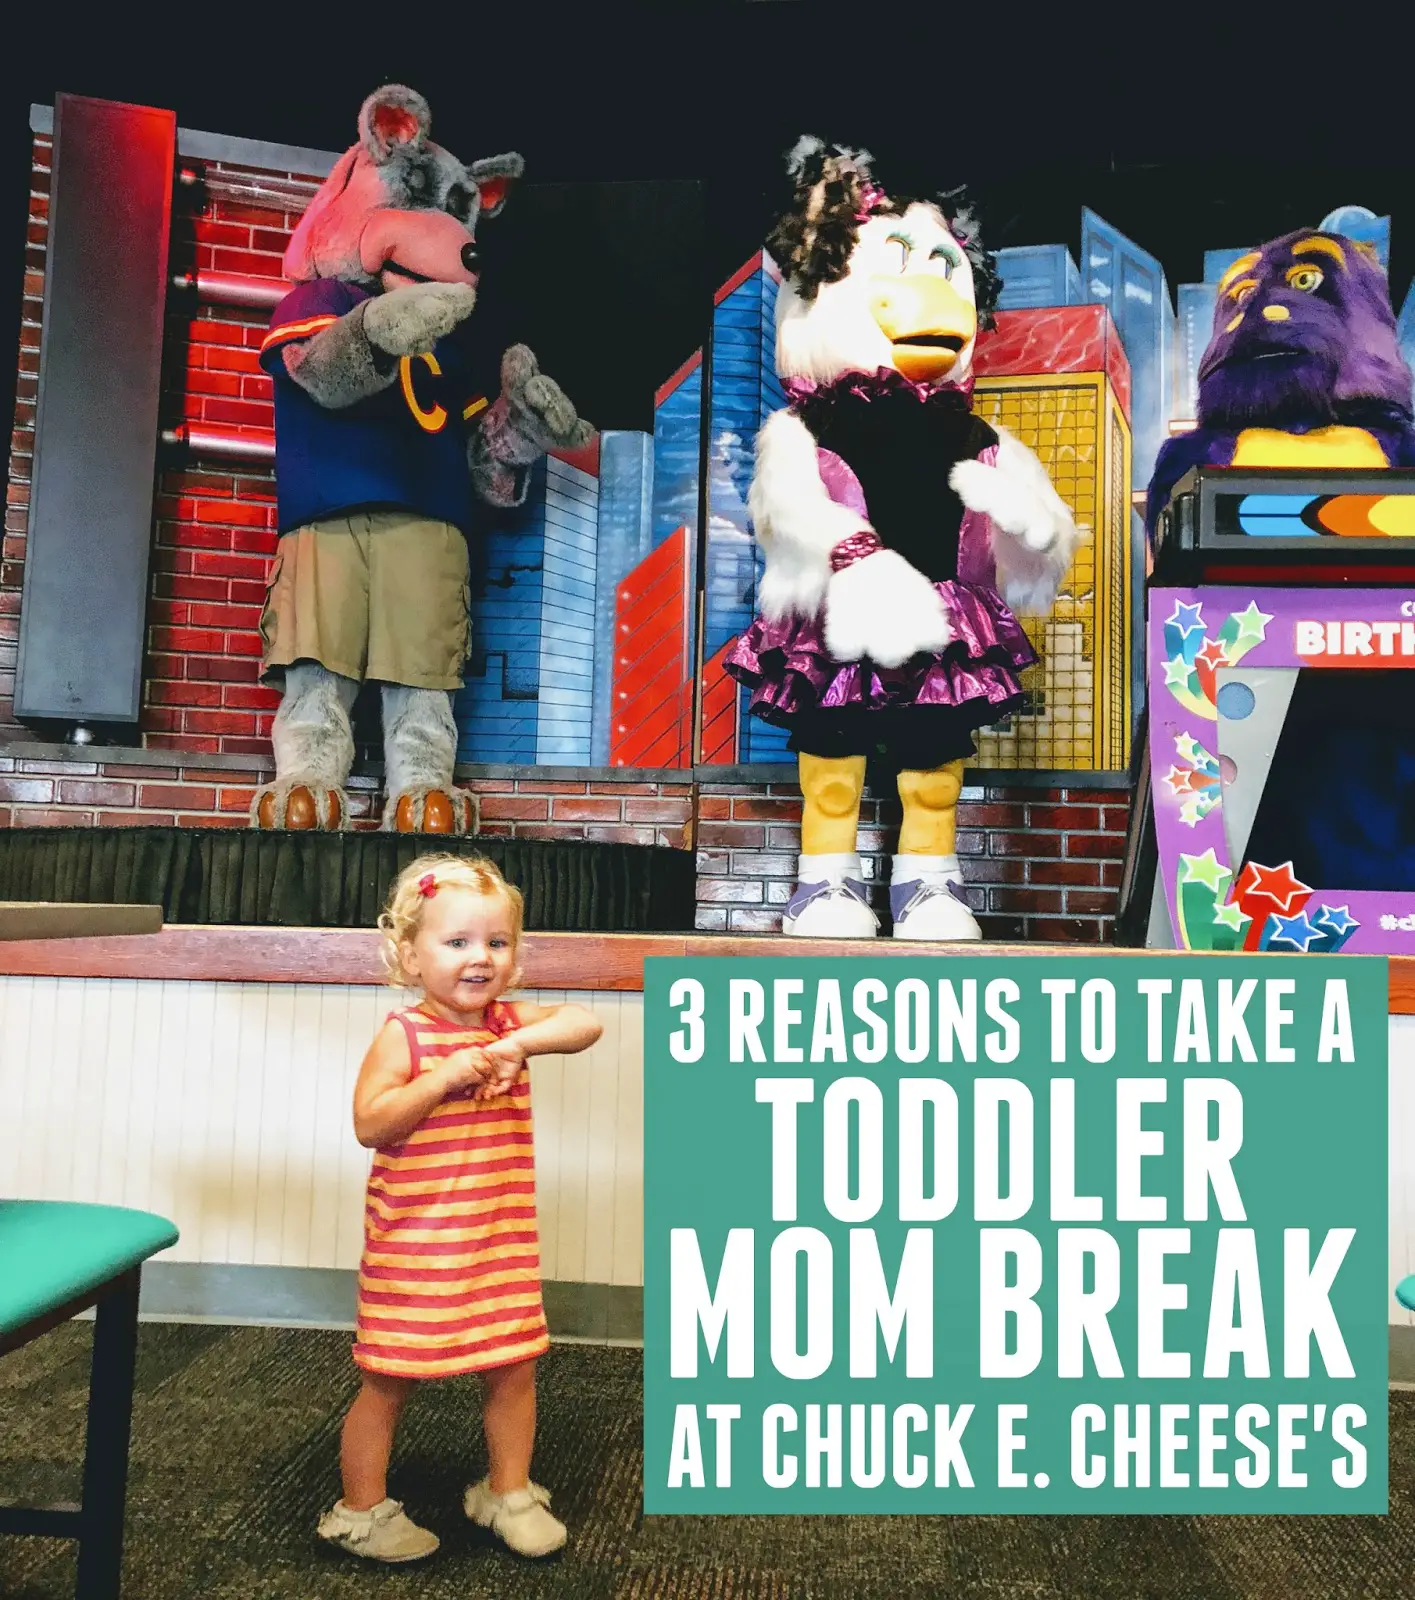 Toddler Approved!: 3 Reasons Chuck E. Cheese